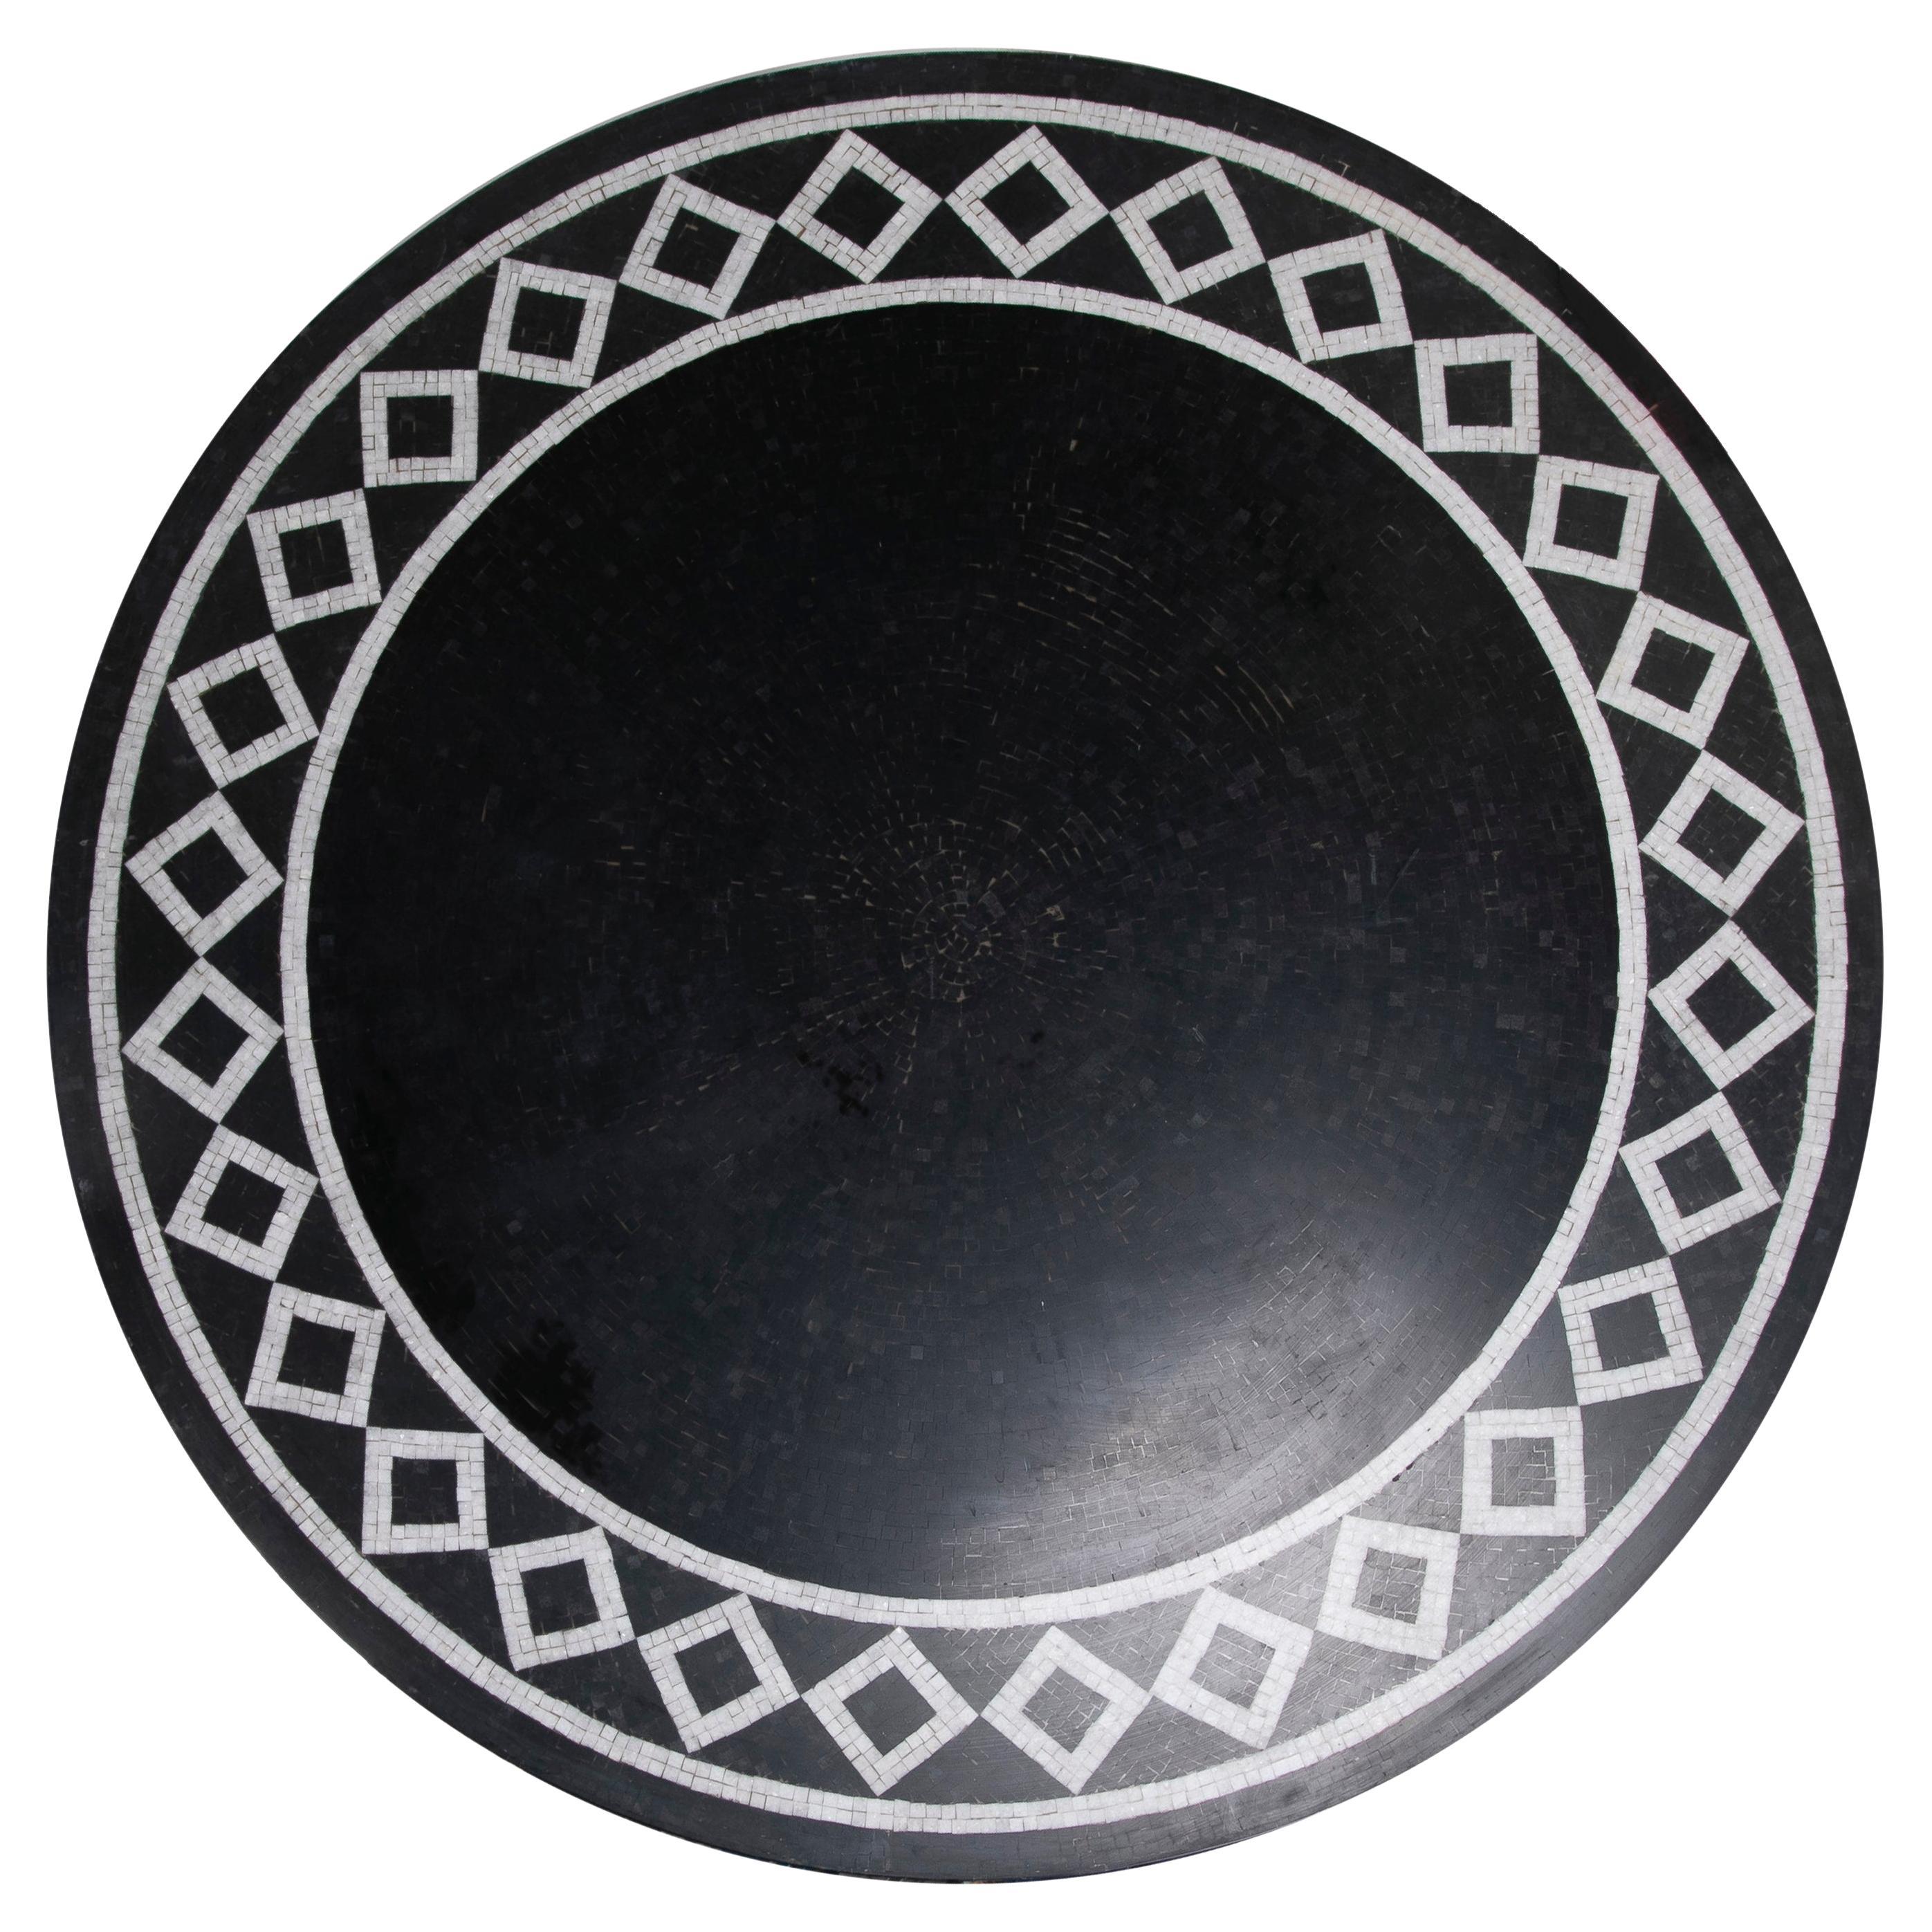 1990s Spanish Classical Roman Mosaic Round Black & White Marble Table Top